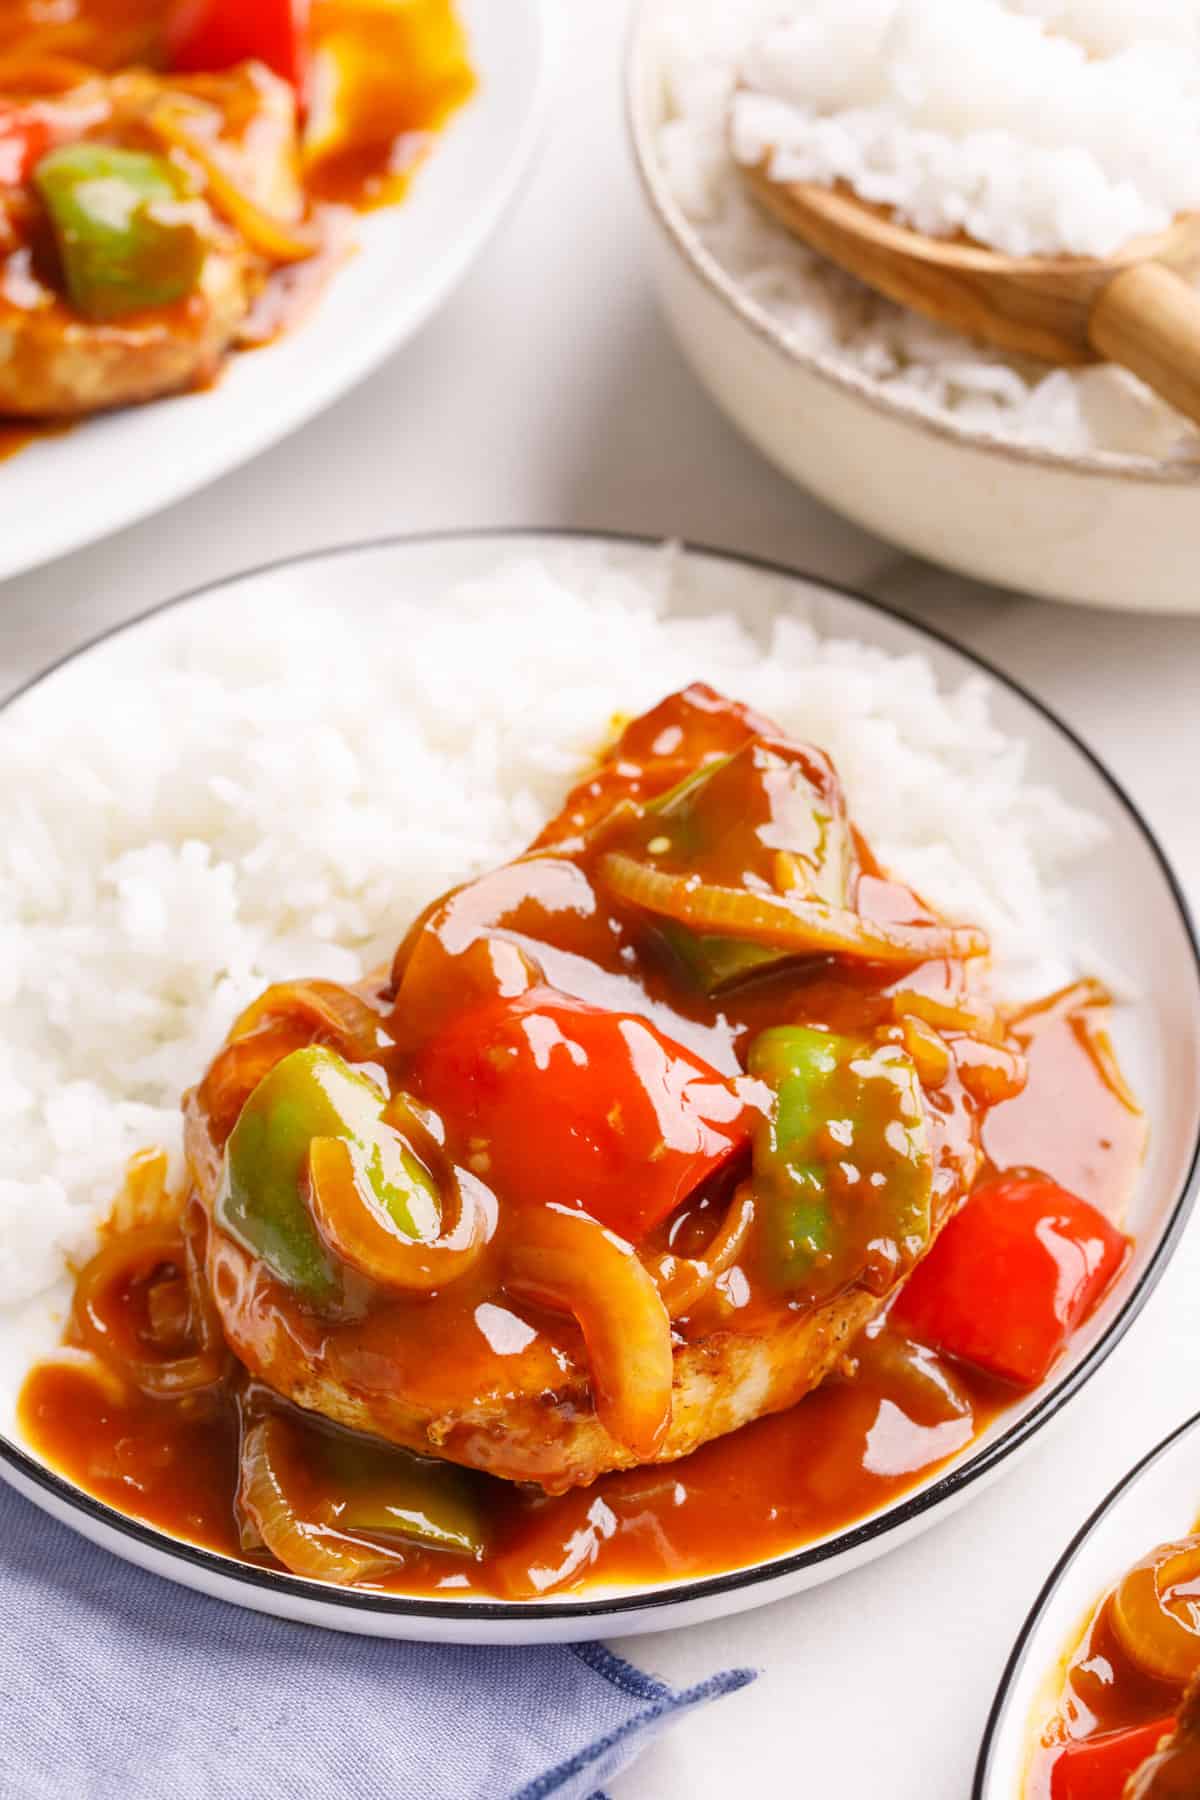 sweet and sour pork chops served on a plate with a side of white rice